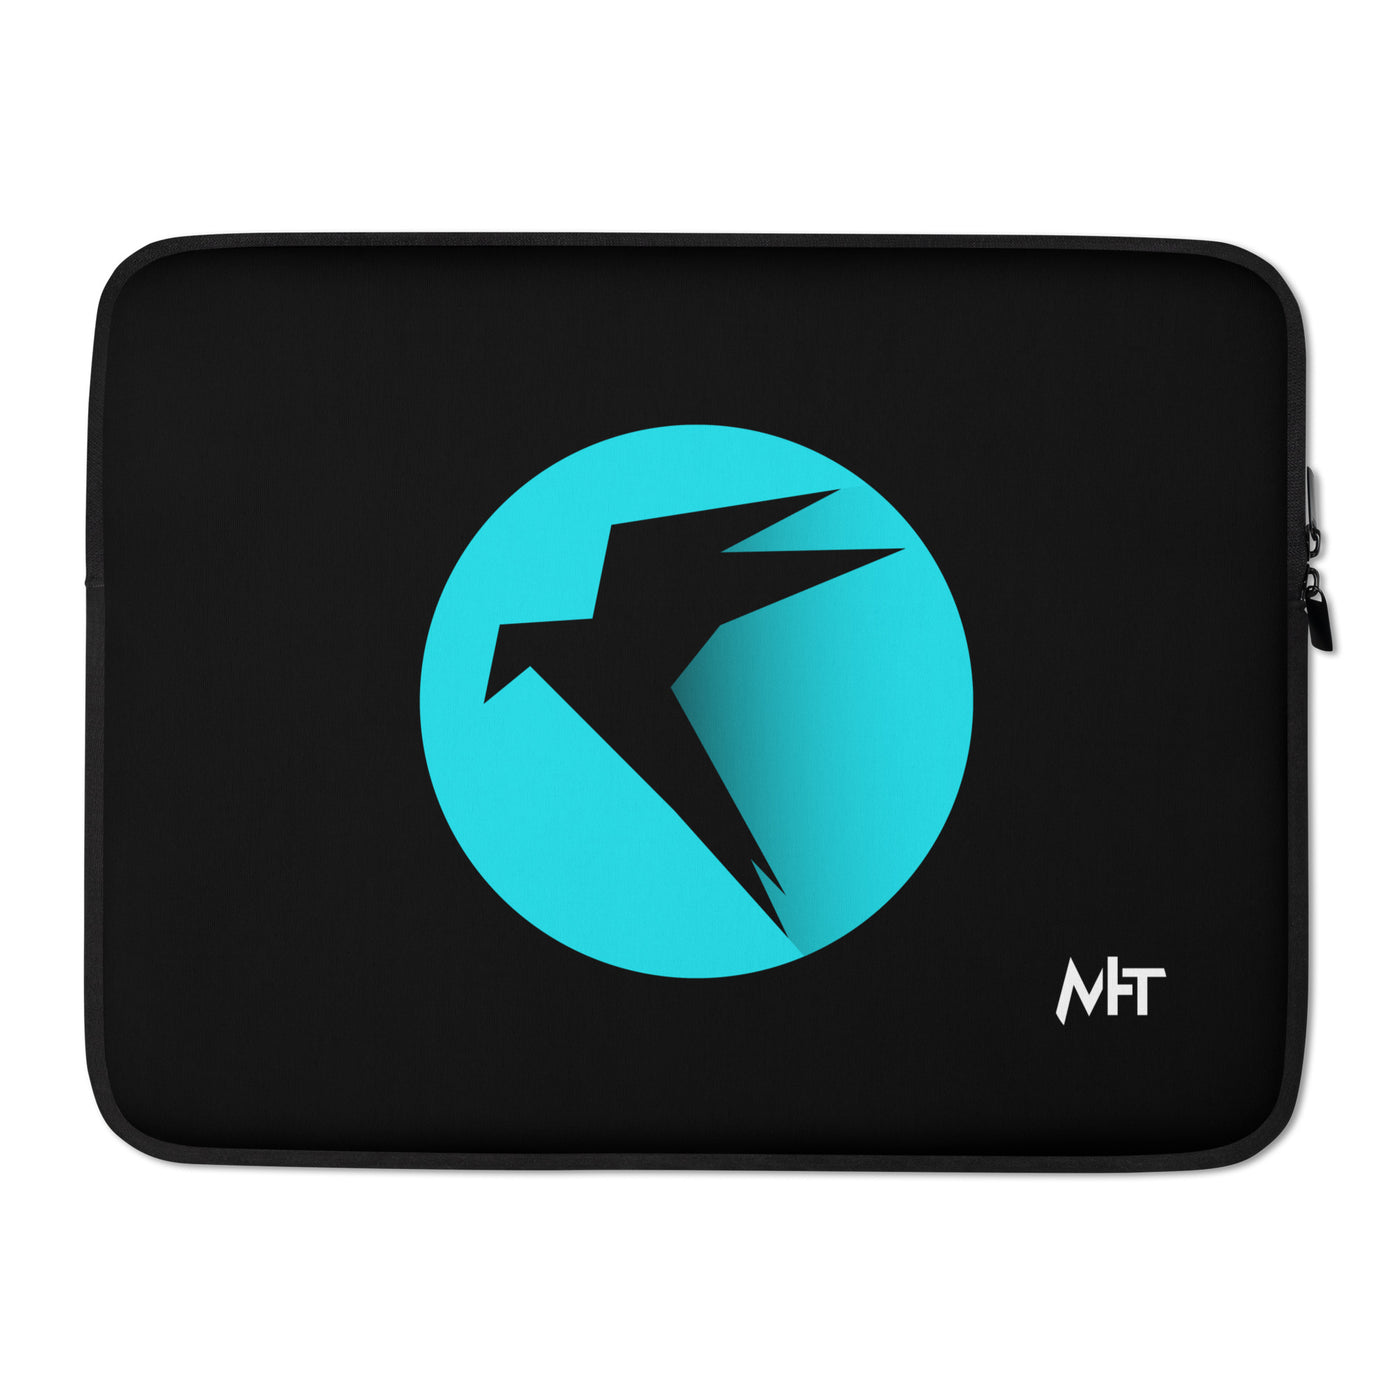 Parrot OS - The Operating System for Hackers - Laptop Sleeve